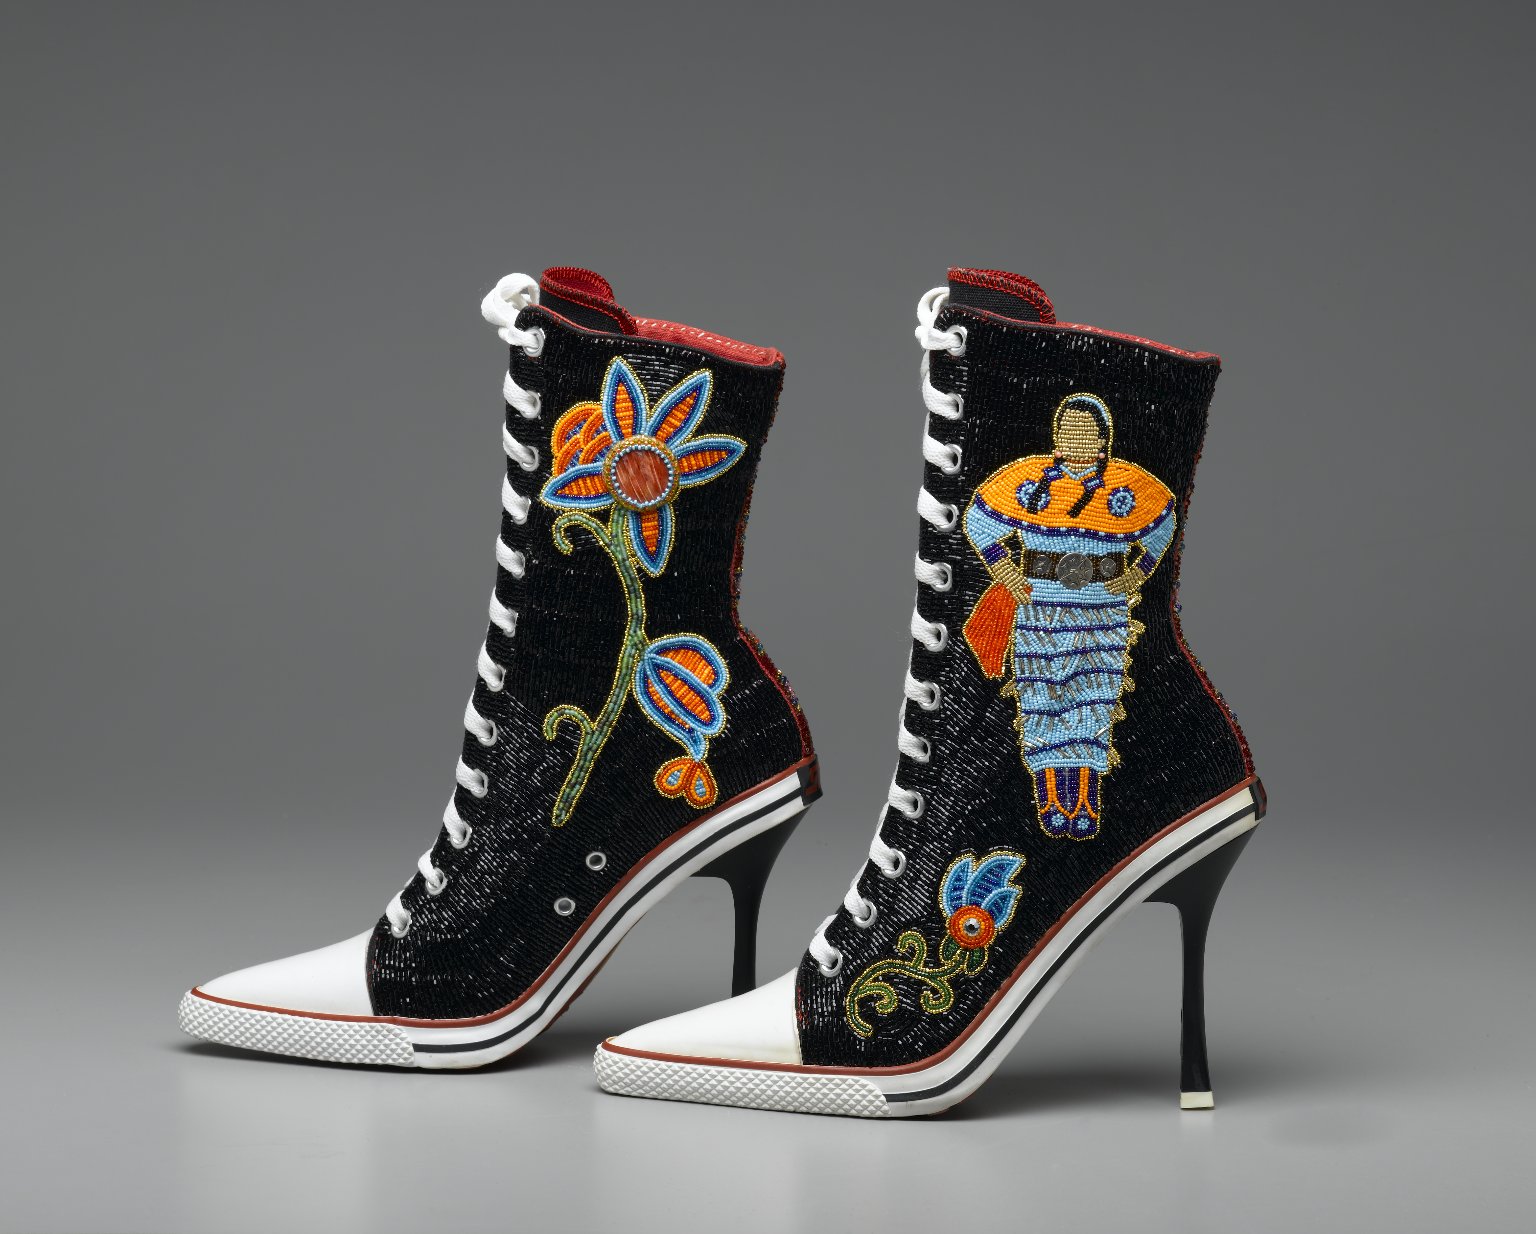 Black beaded sneakers on high heels with a colorful beaded flower and woman